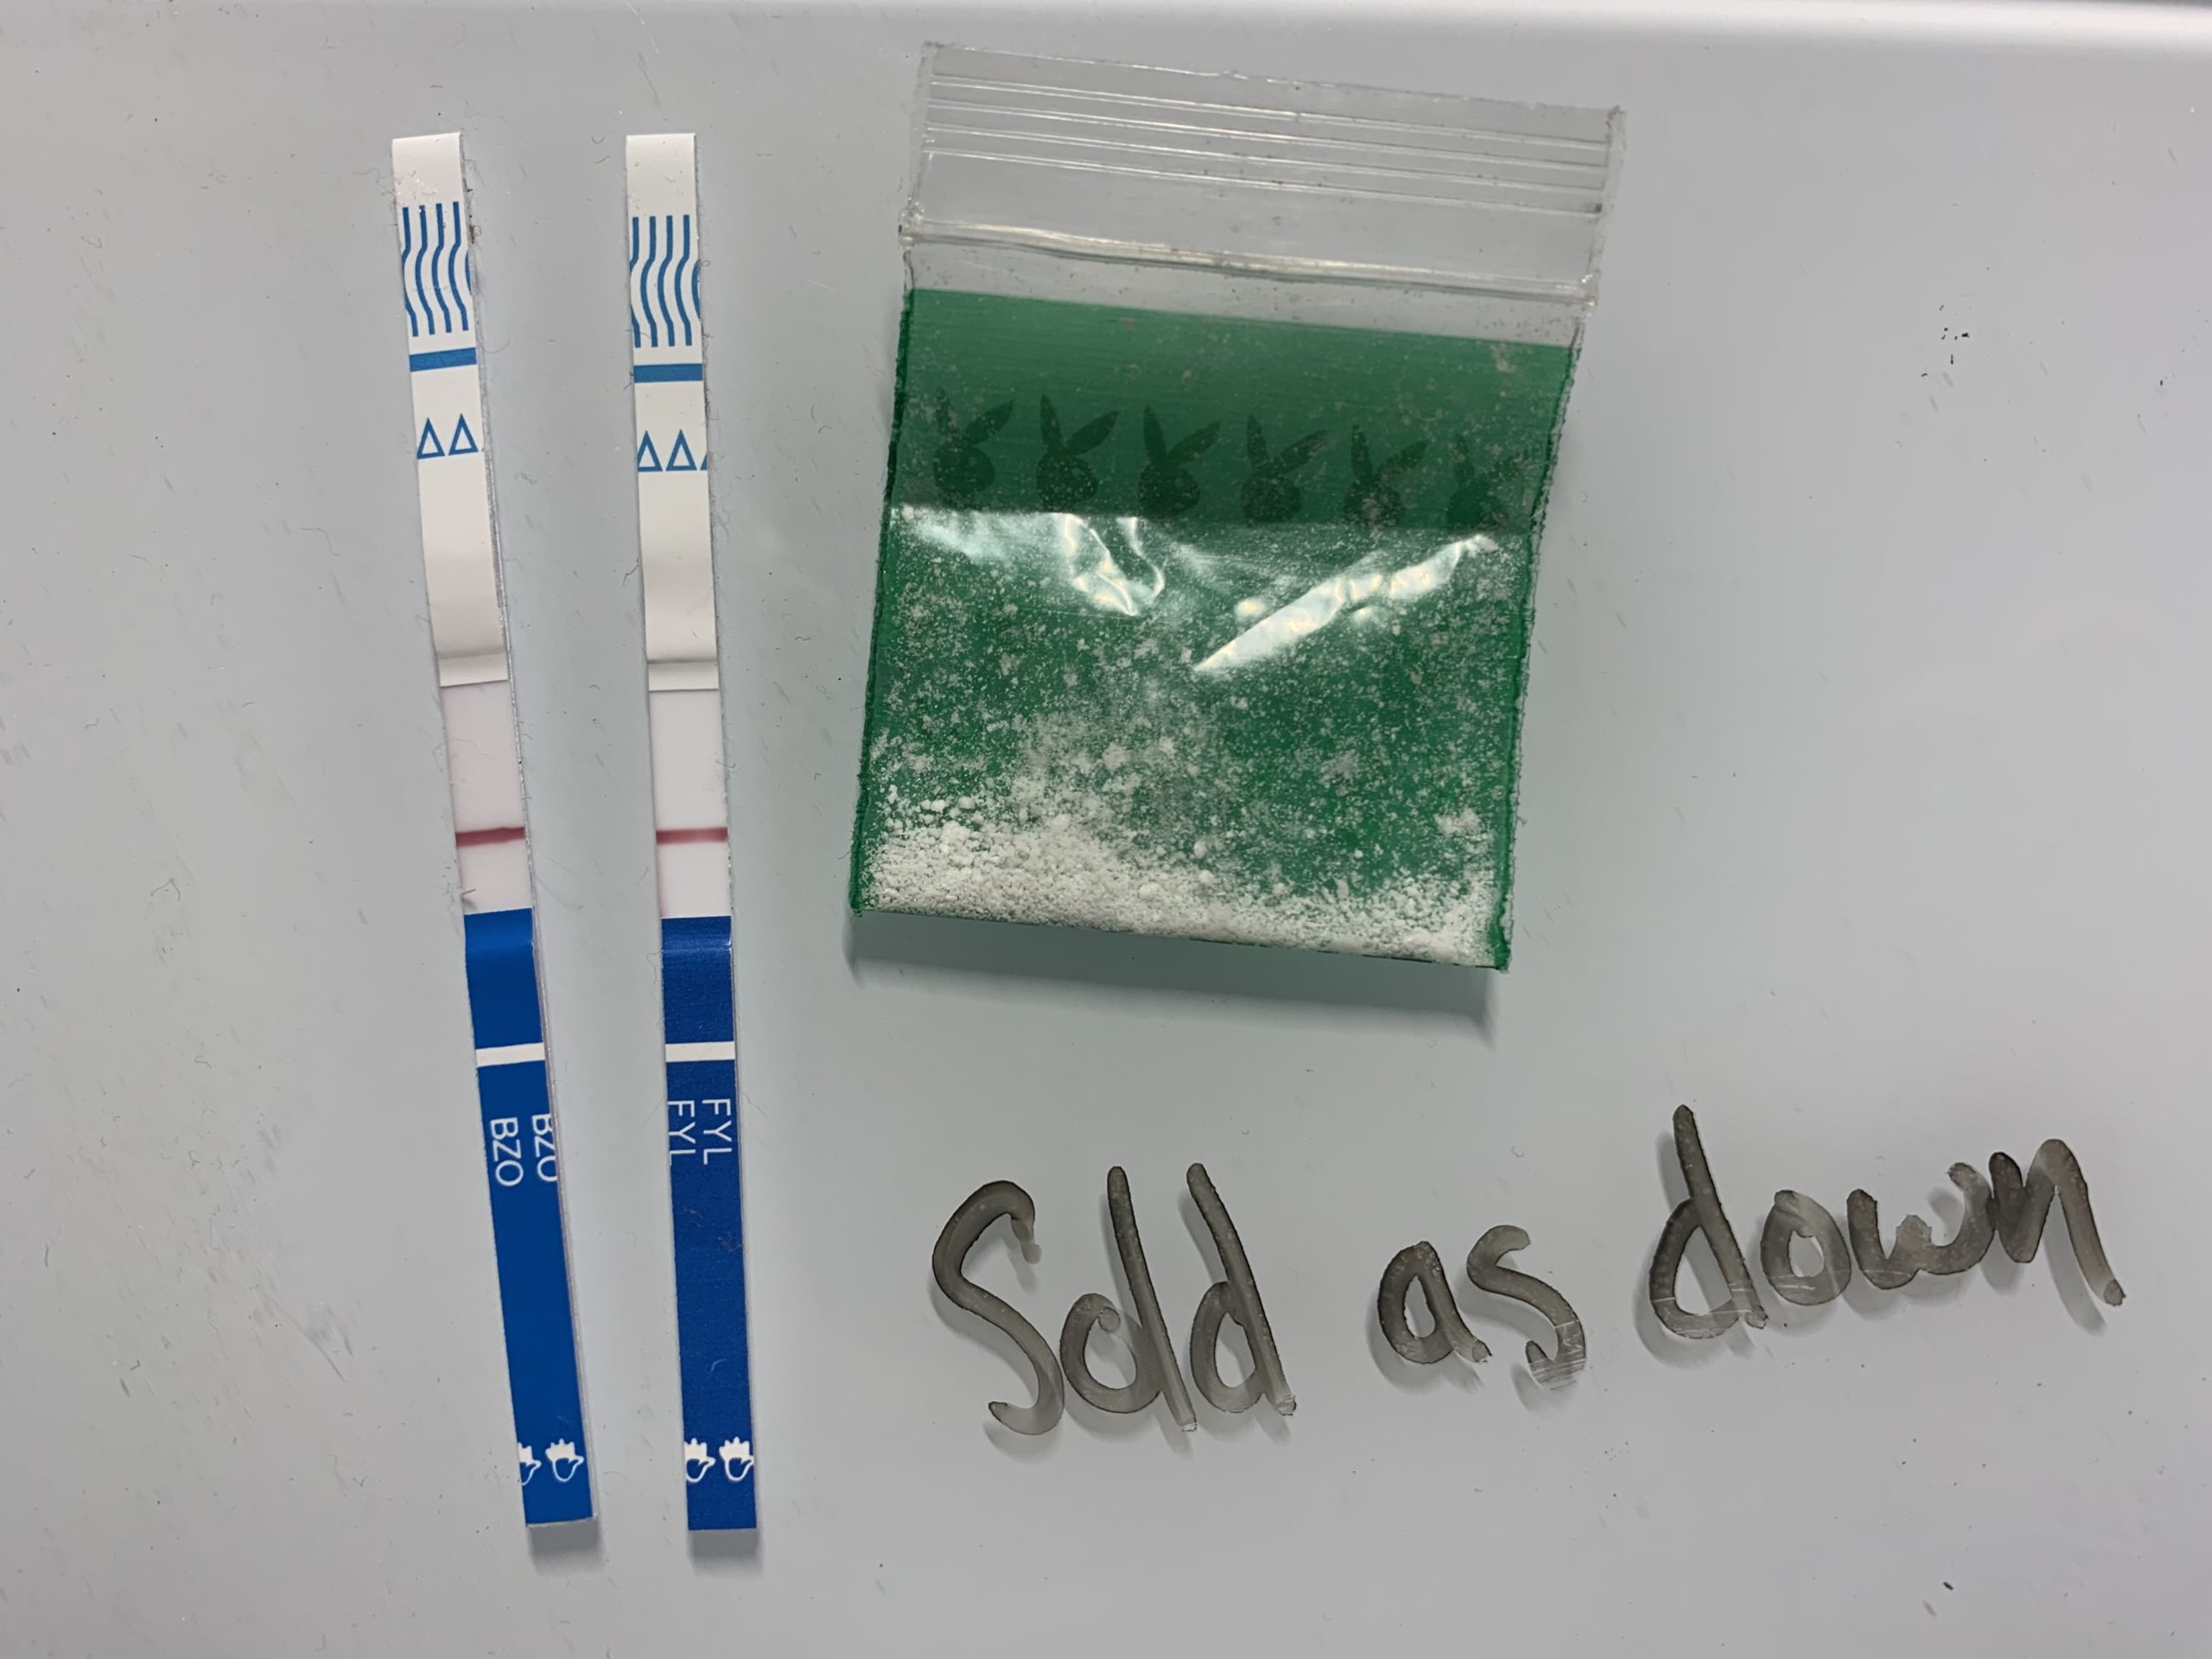 White “down” contains fentanyl, benzos and an unknown substance